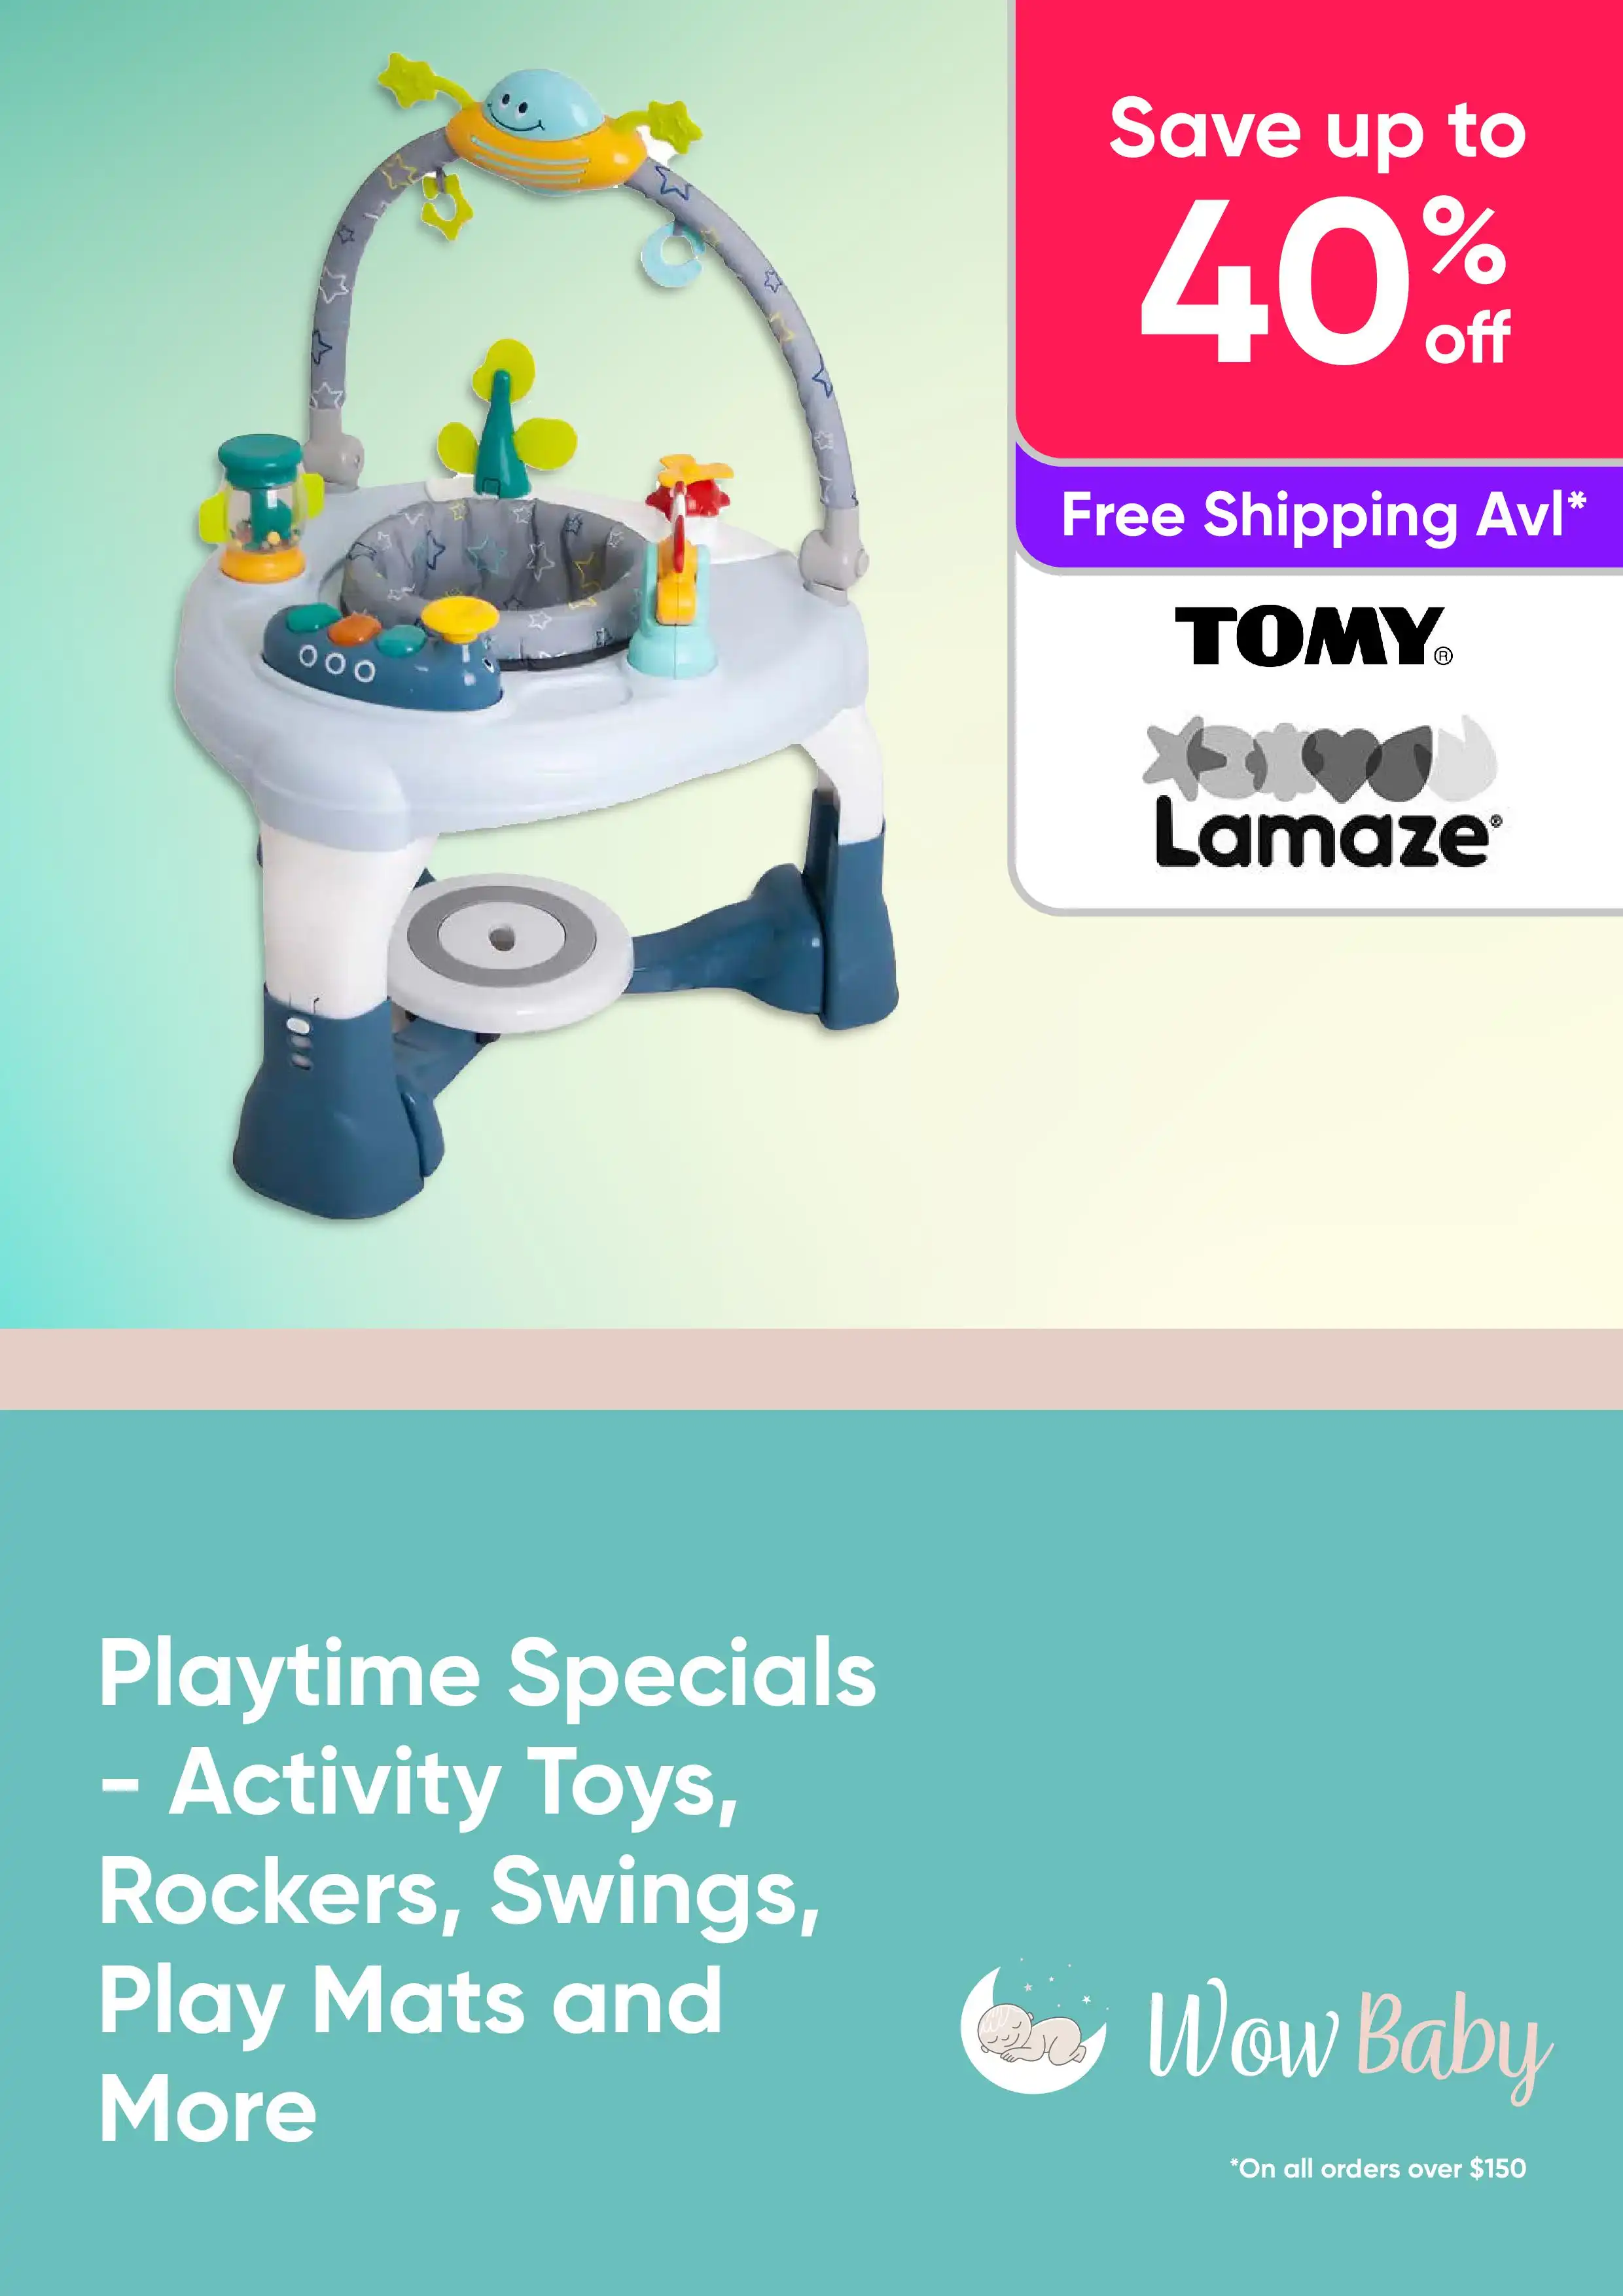 Baby Playtime Specials - Activity Toys, Rockers, Swings, Play Mats and More - Save up to 40% off